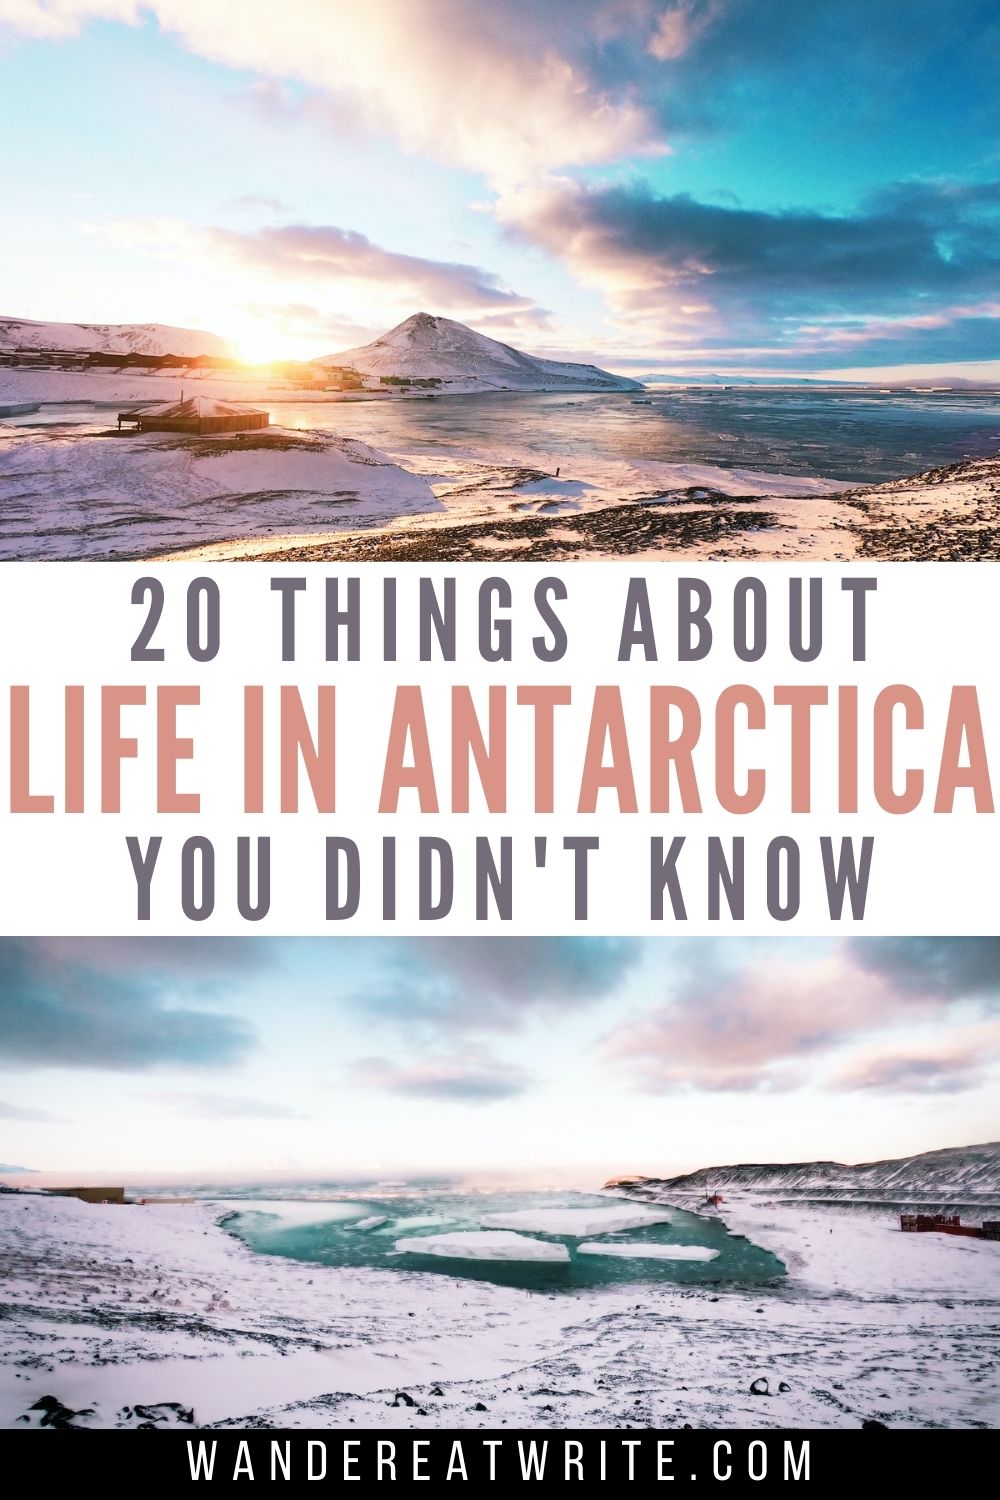 Pin image. Text reads: 20 things about life in Antarctica you didn't know. Top Photo: sun setting behind Ob Hill with Discovery hut in the foreground and sea ice to the right. Bottom Image: Icebergs breaking away from Winter Quarter's Bay